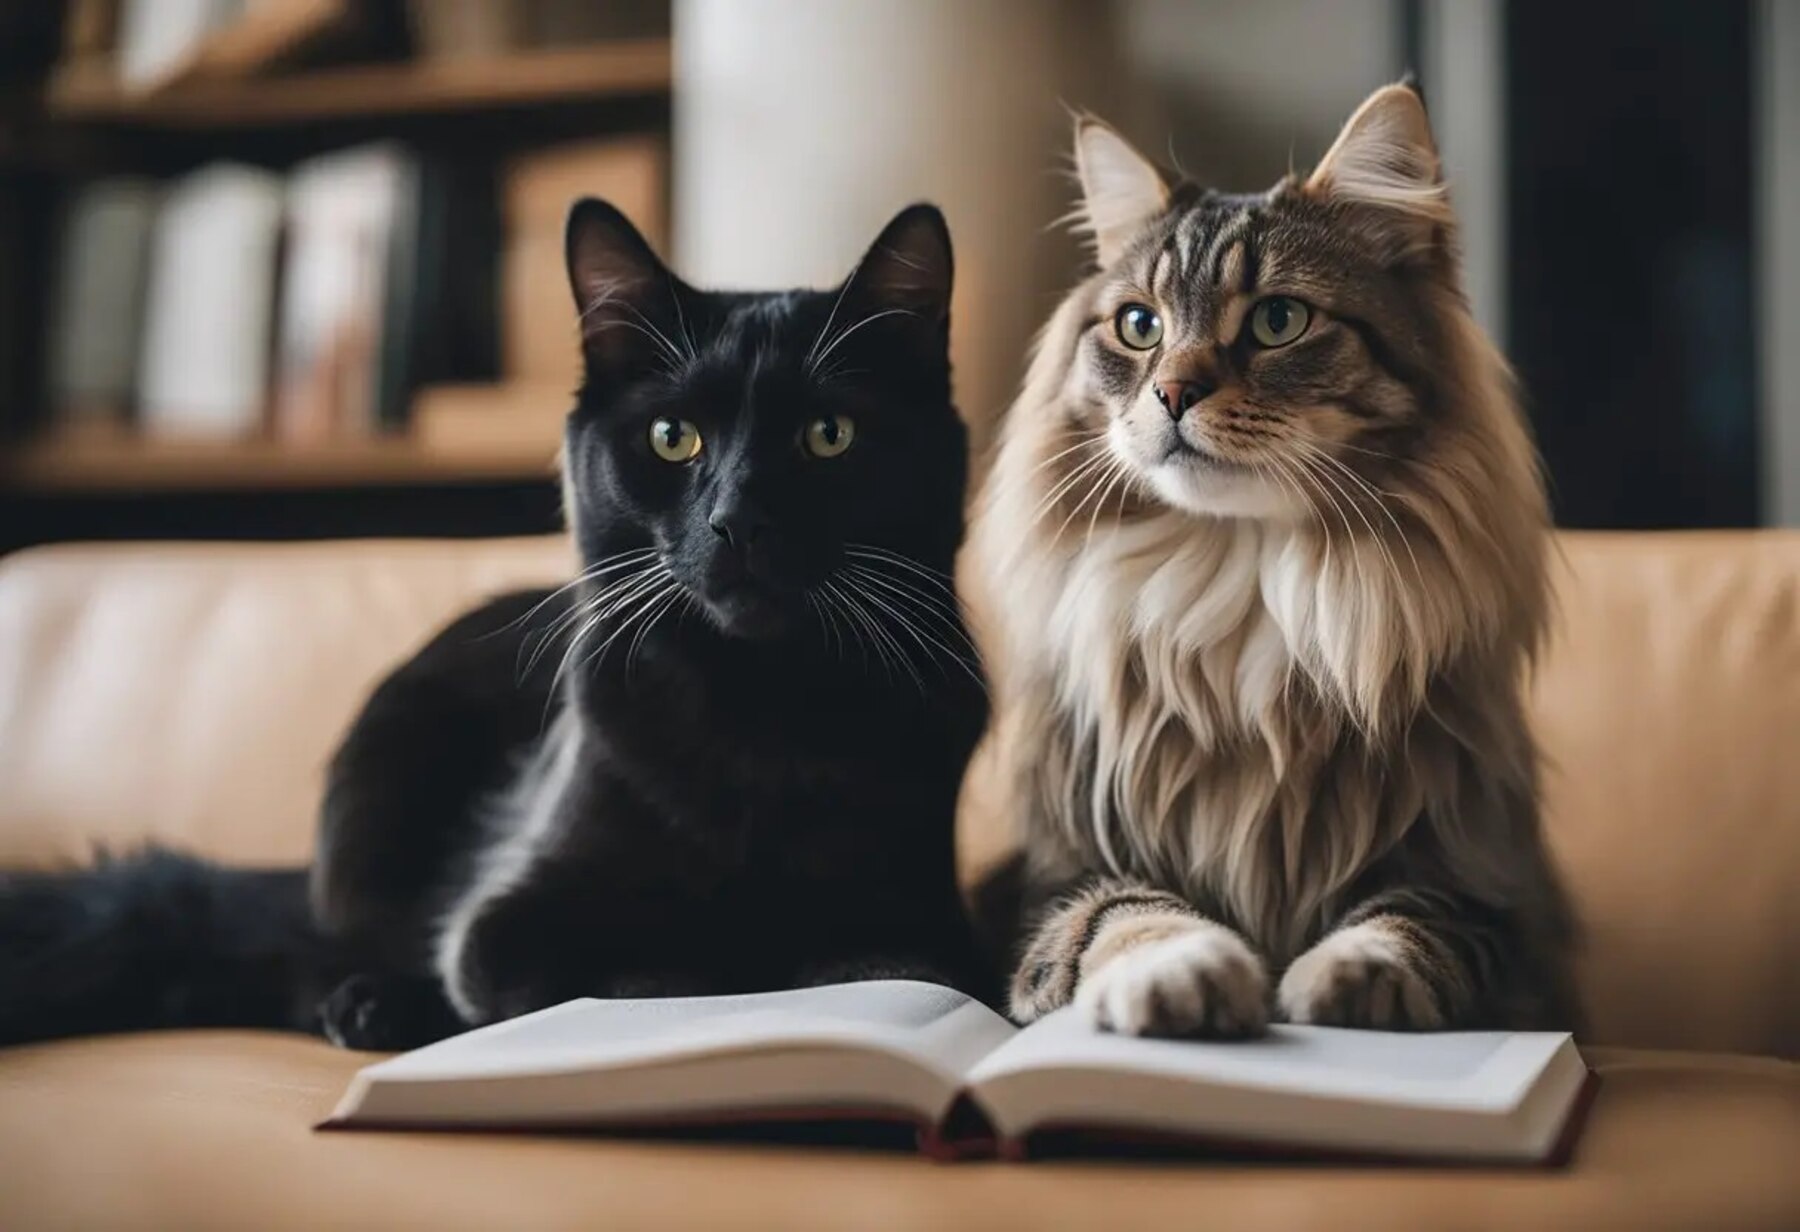 Black cat and fluffy tabby cat with a book